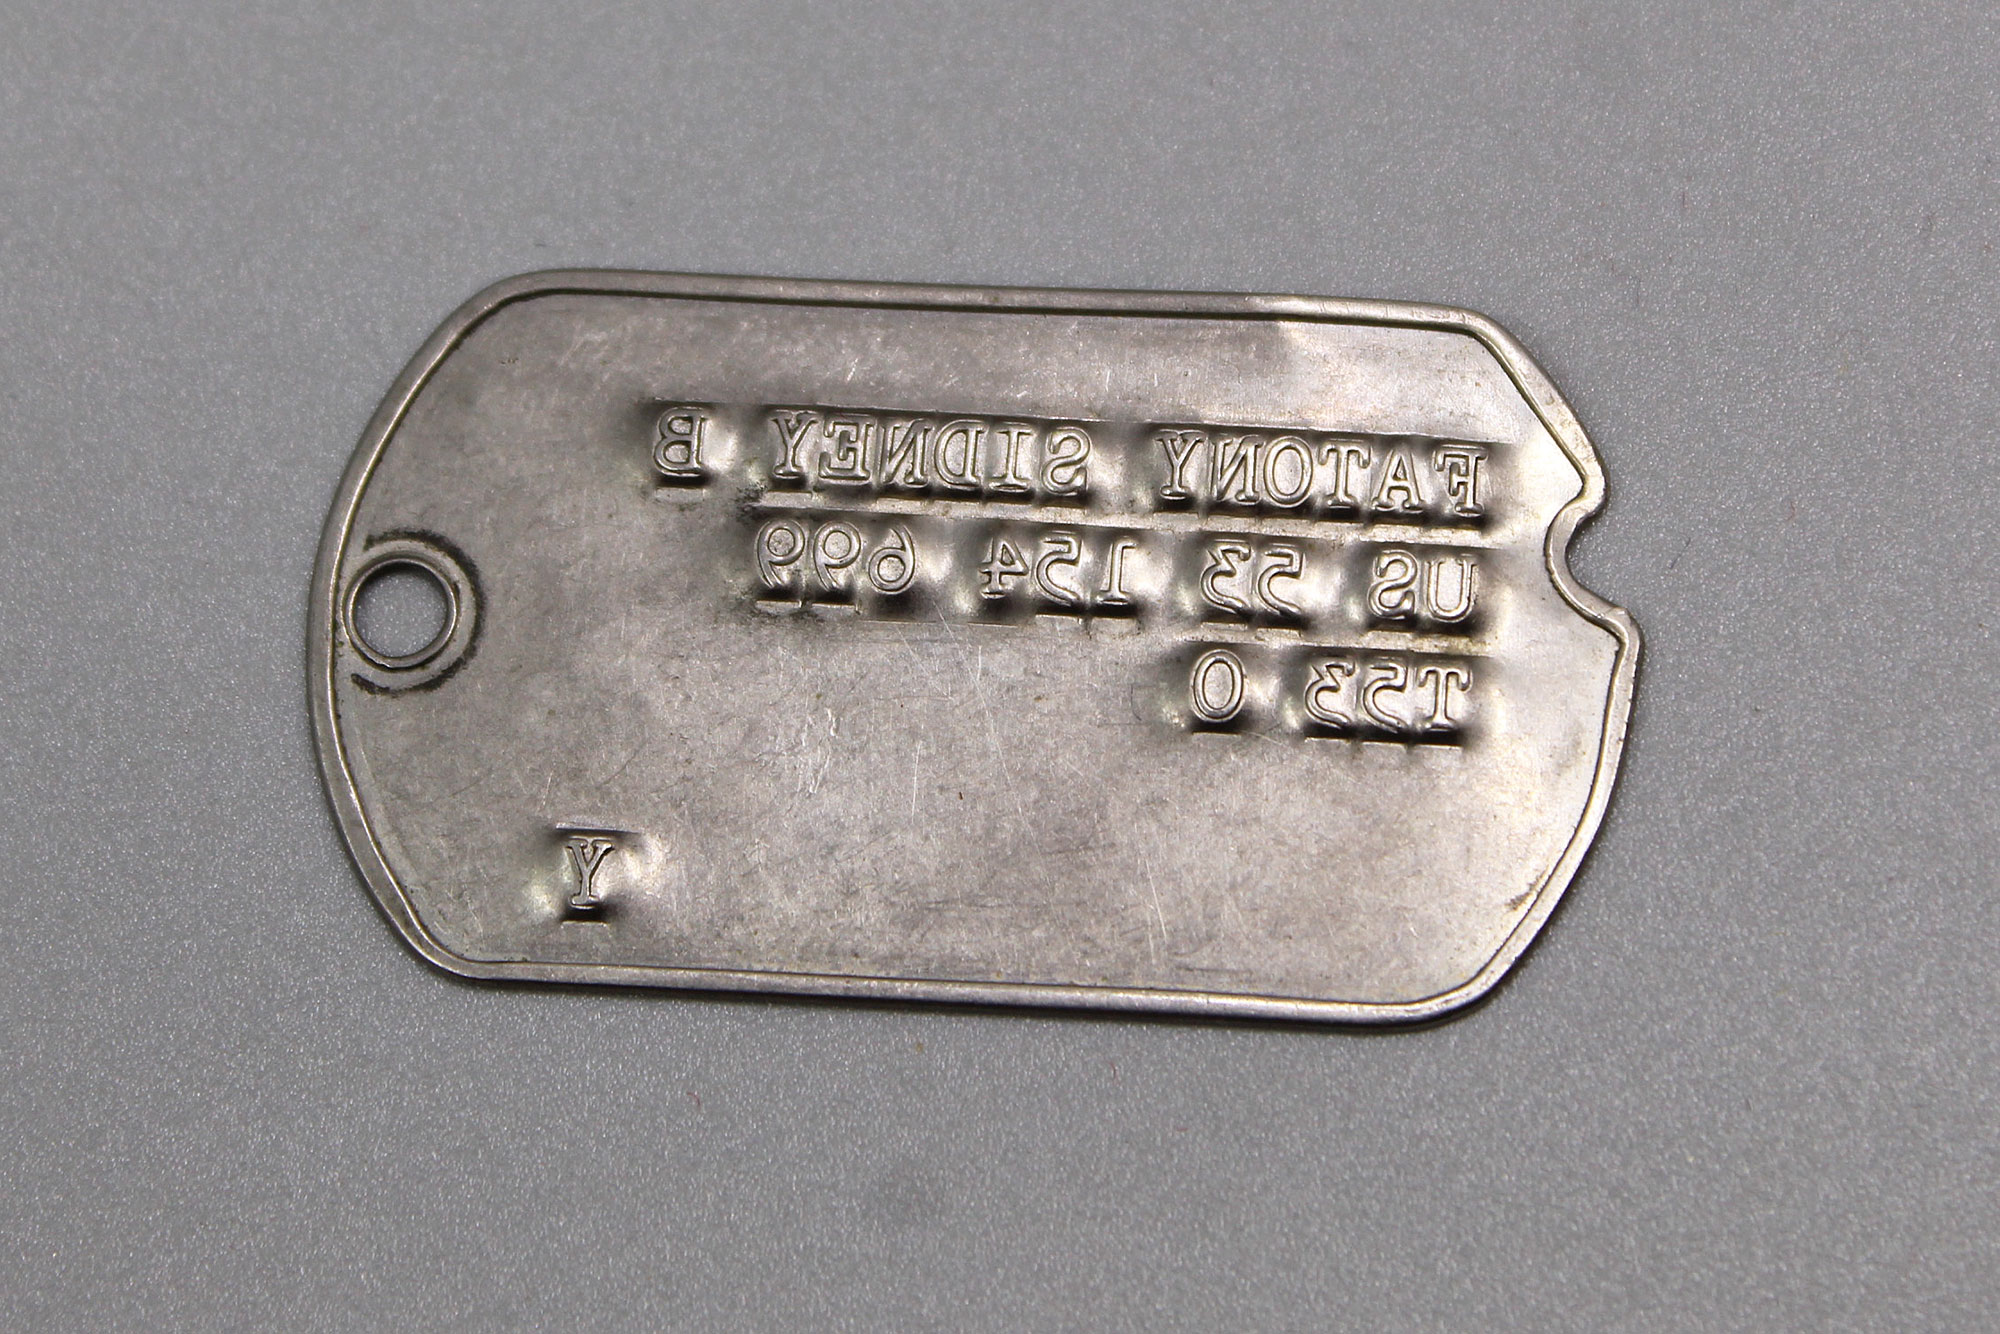 Made Strong® Dog Tags – Made Strong™